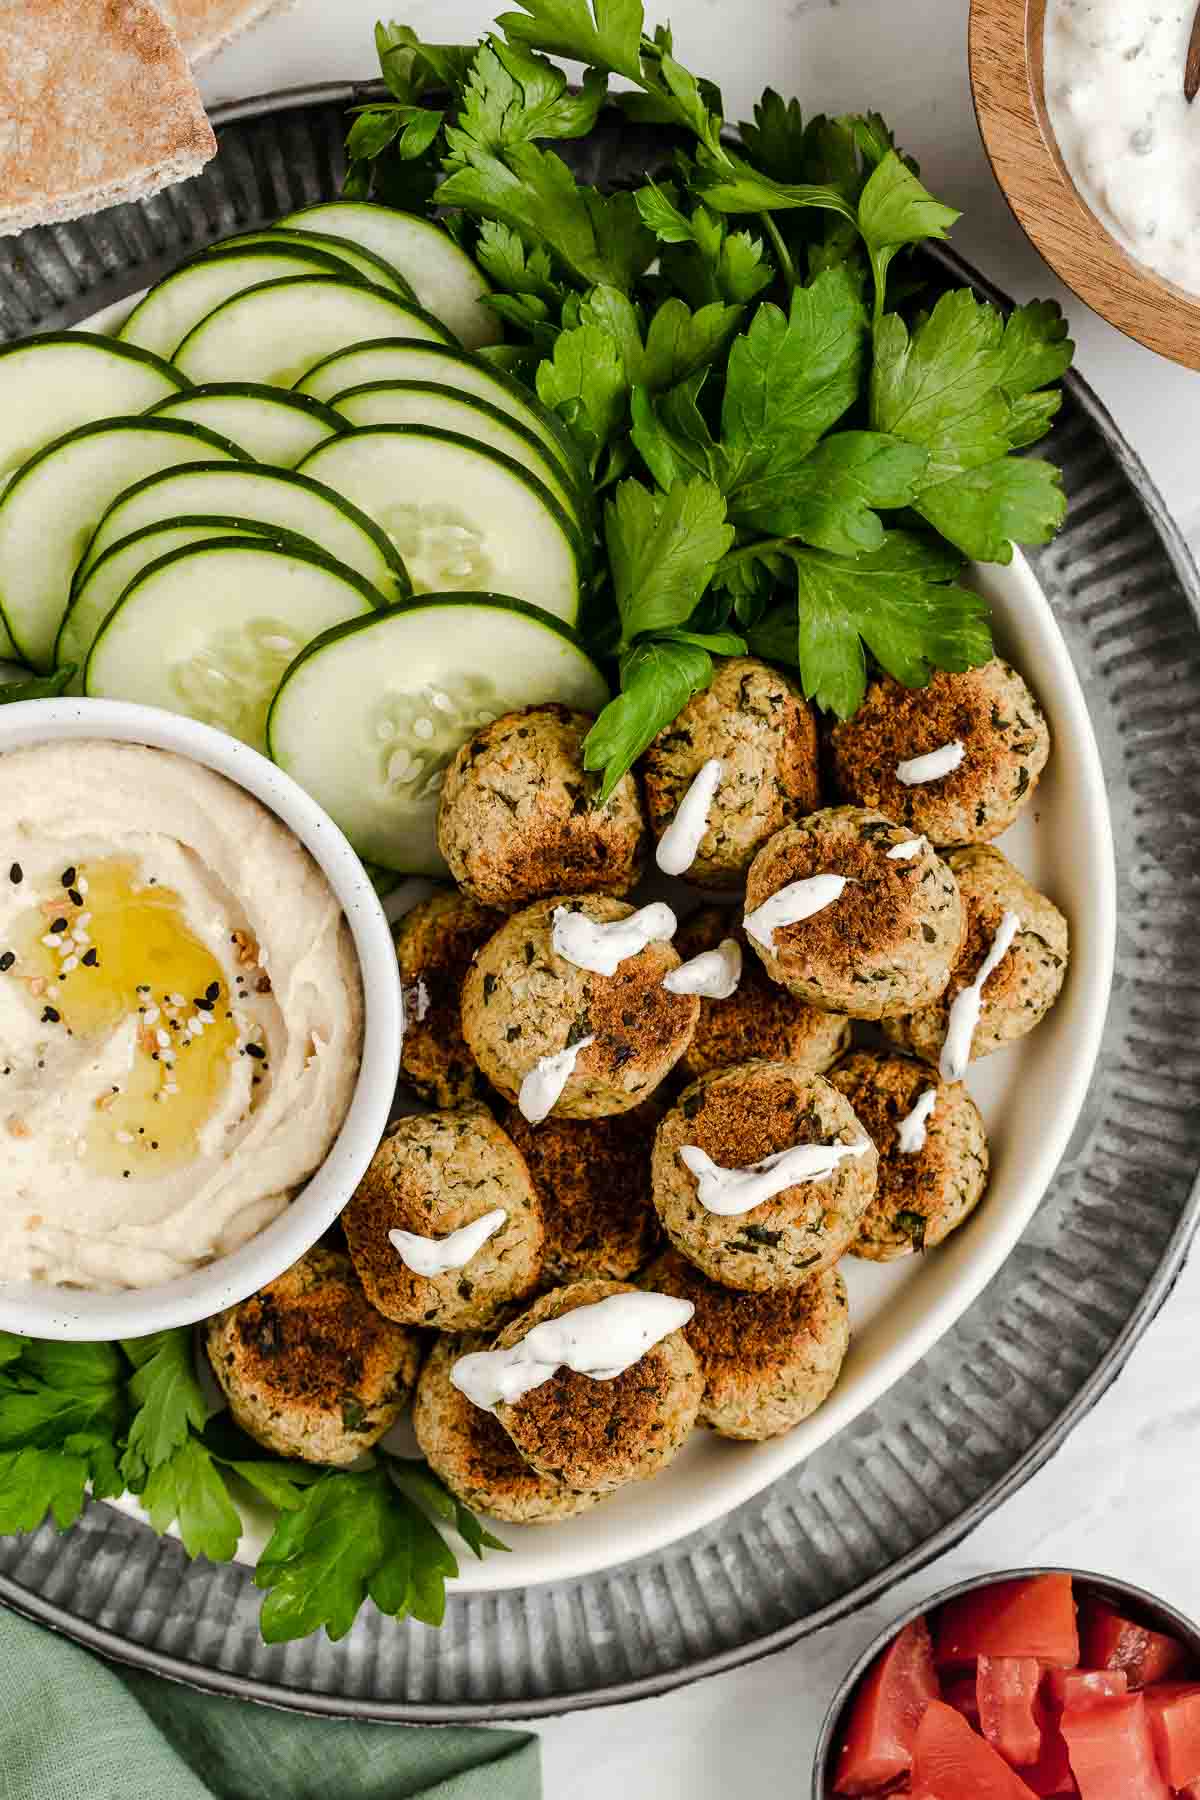 Vertical shot of plate with baked falafel, cucumbers and hummus dip.